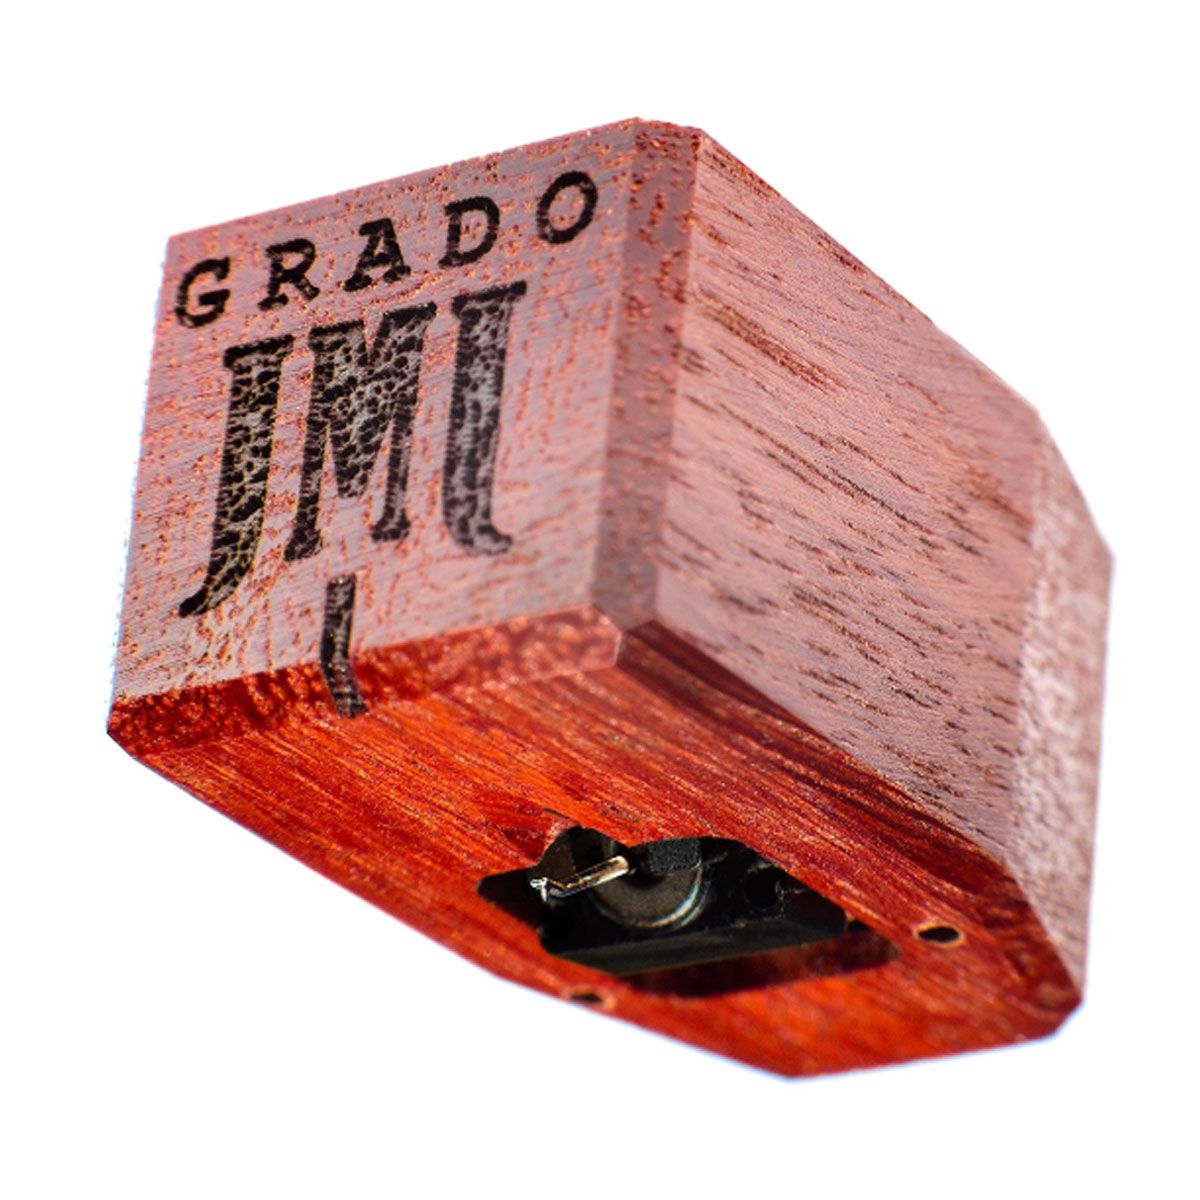 Grado Reference3 Phono Cartridge - High Output, front view